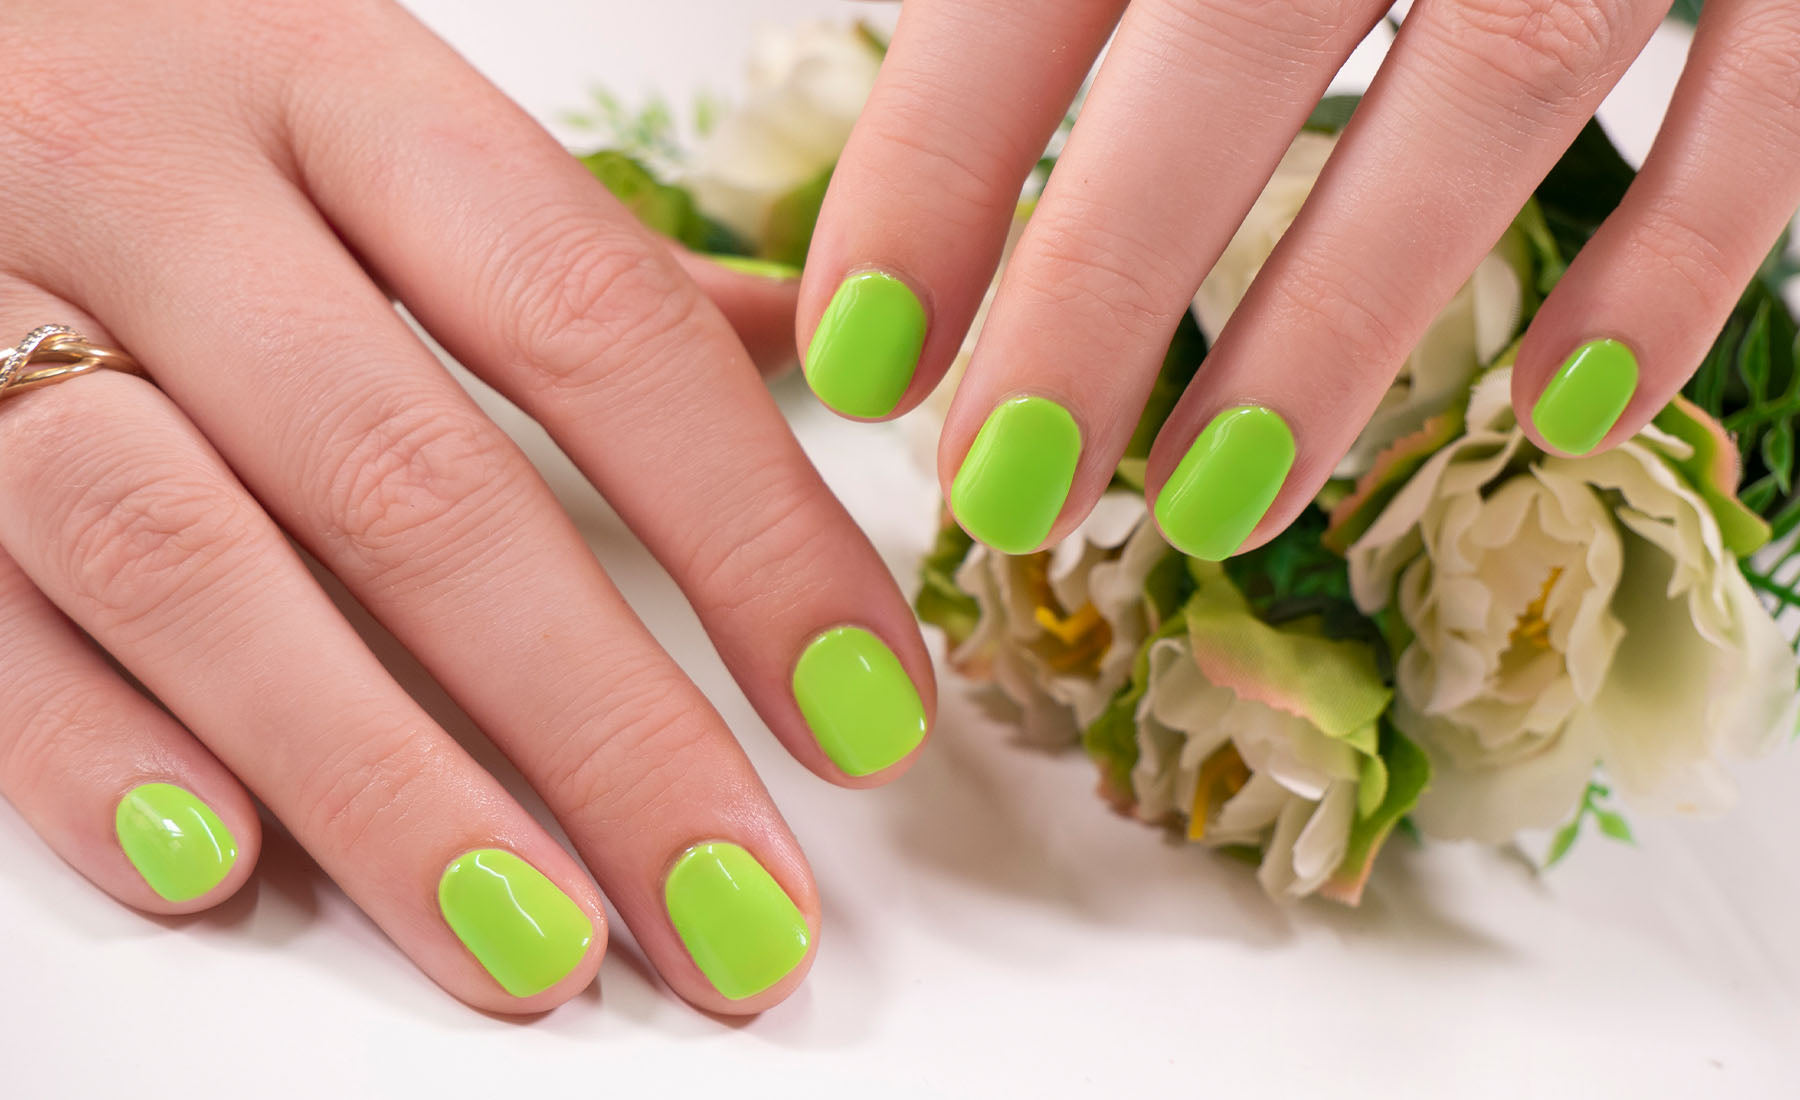 Gelous Appletini gel nail polish - photographed in United States on model